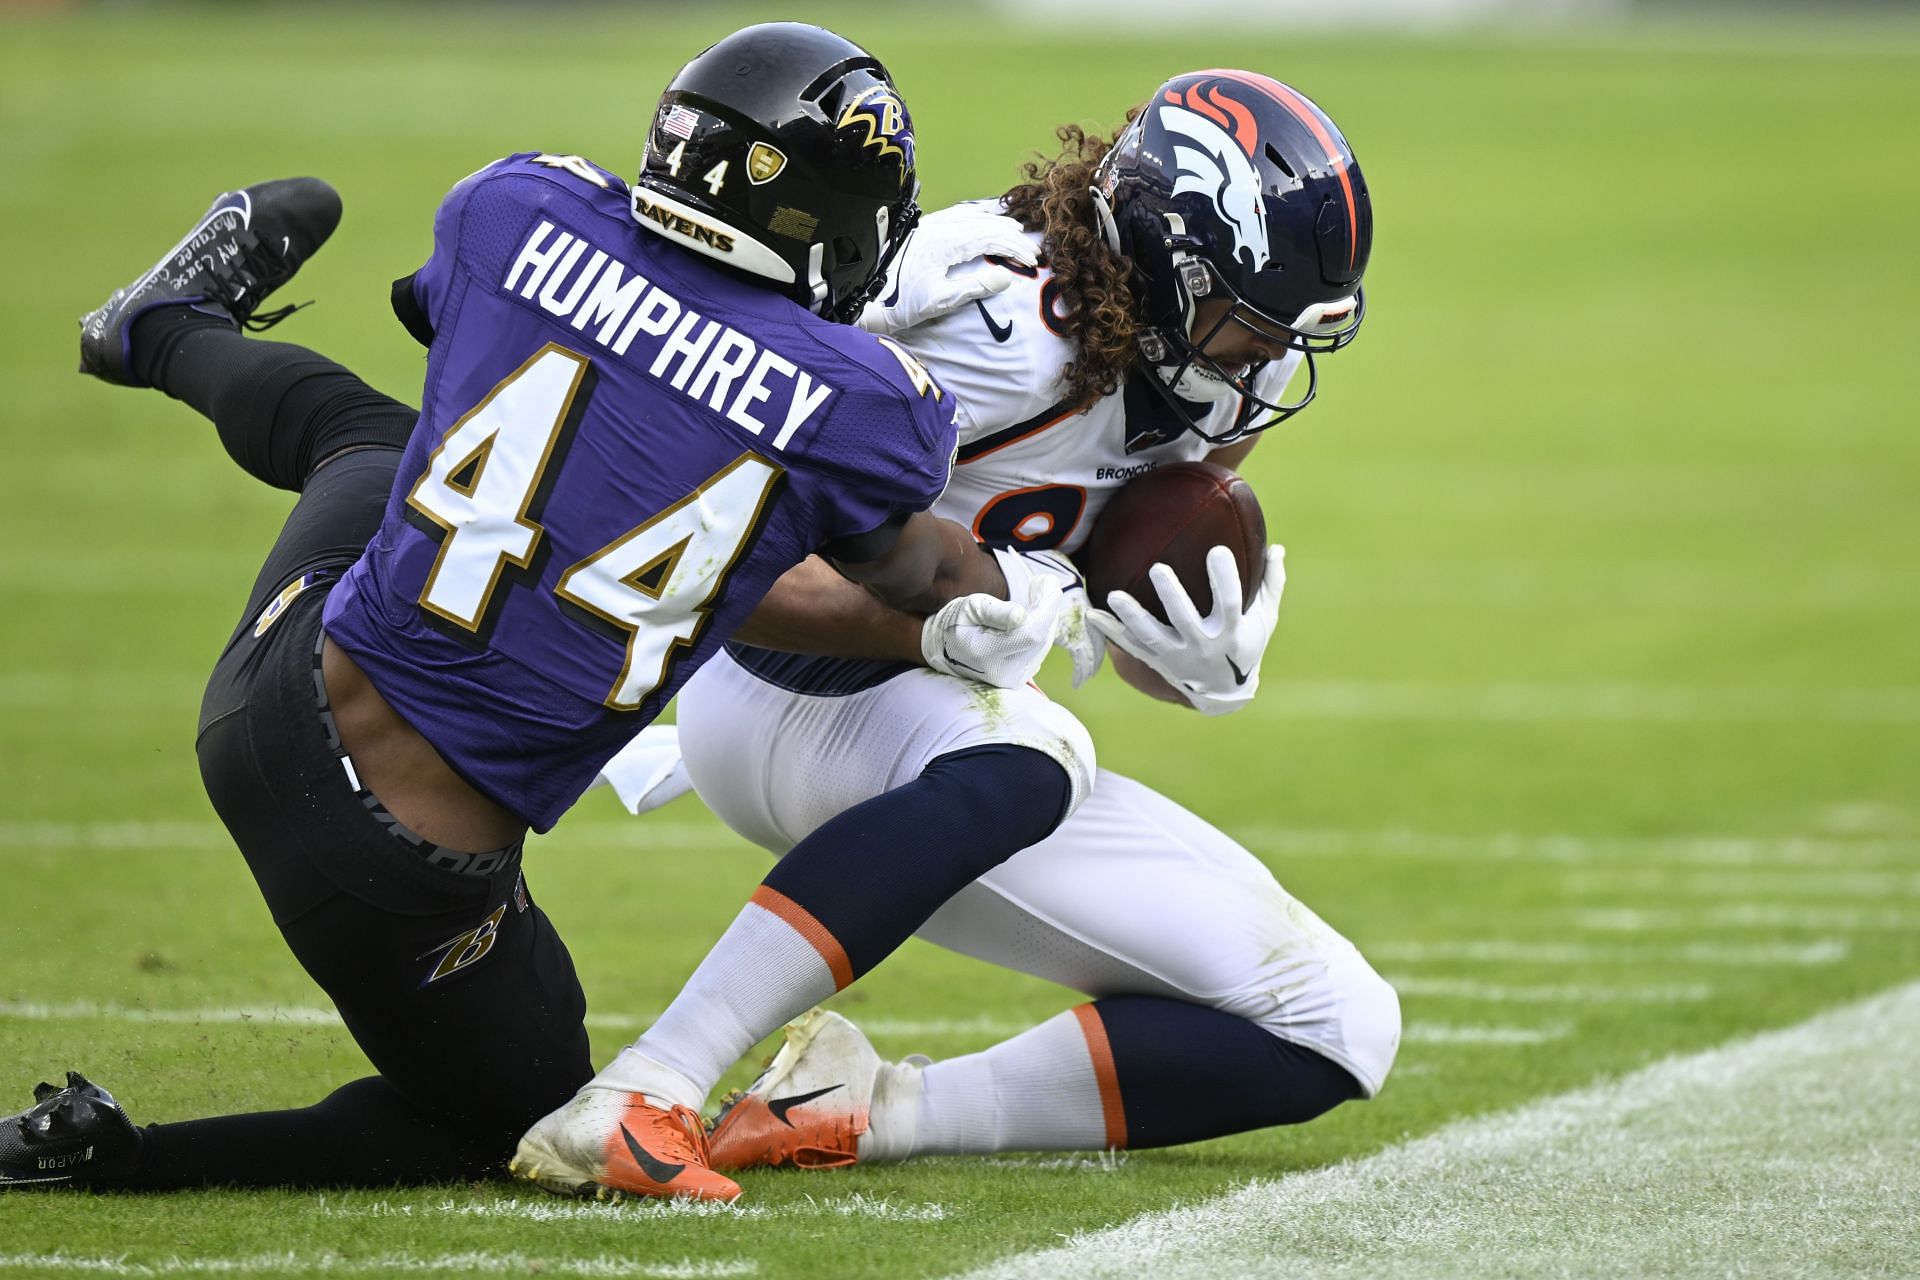 Fantasy football players could earn a lot of points through Baltimore's defense in Week 16